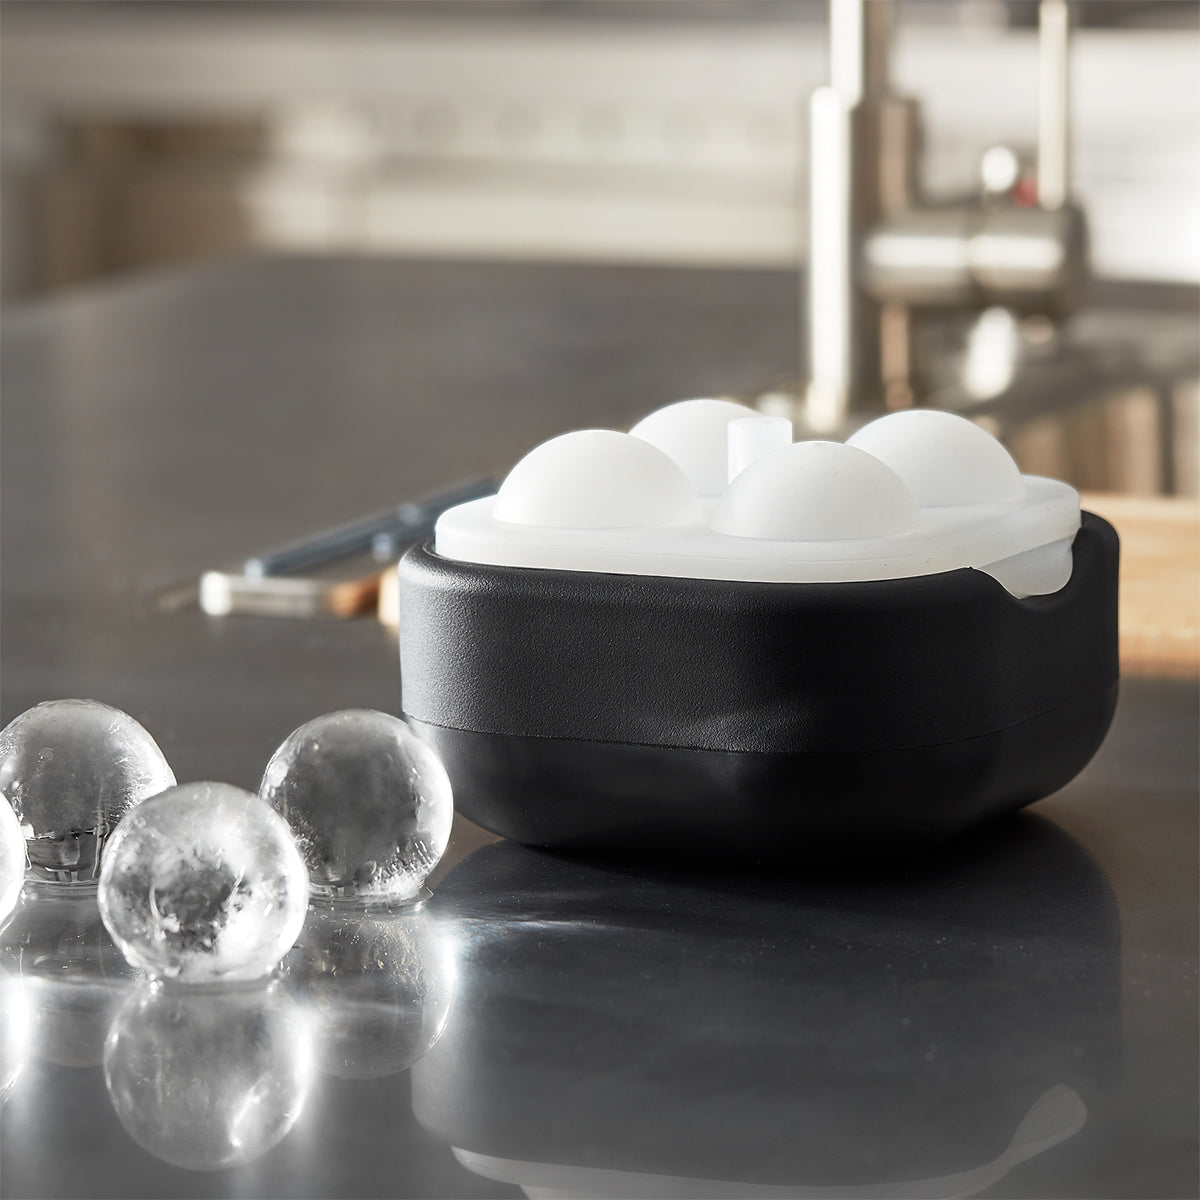 U-CUBE Creative Polar Ice Ball 2.0 - 4 Crystal Clear Ice Balls (4.5cm Dia.) for Whiskey and Cocktails